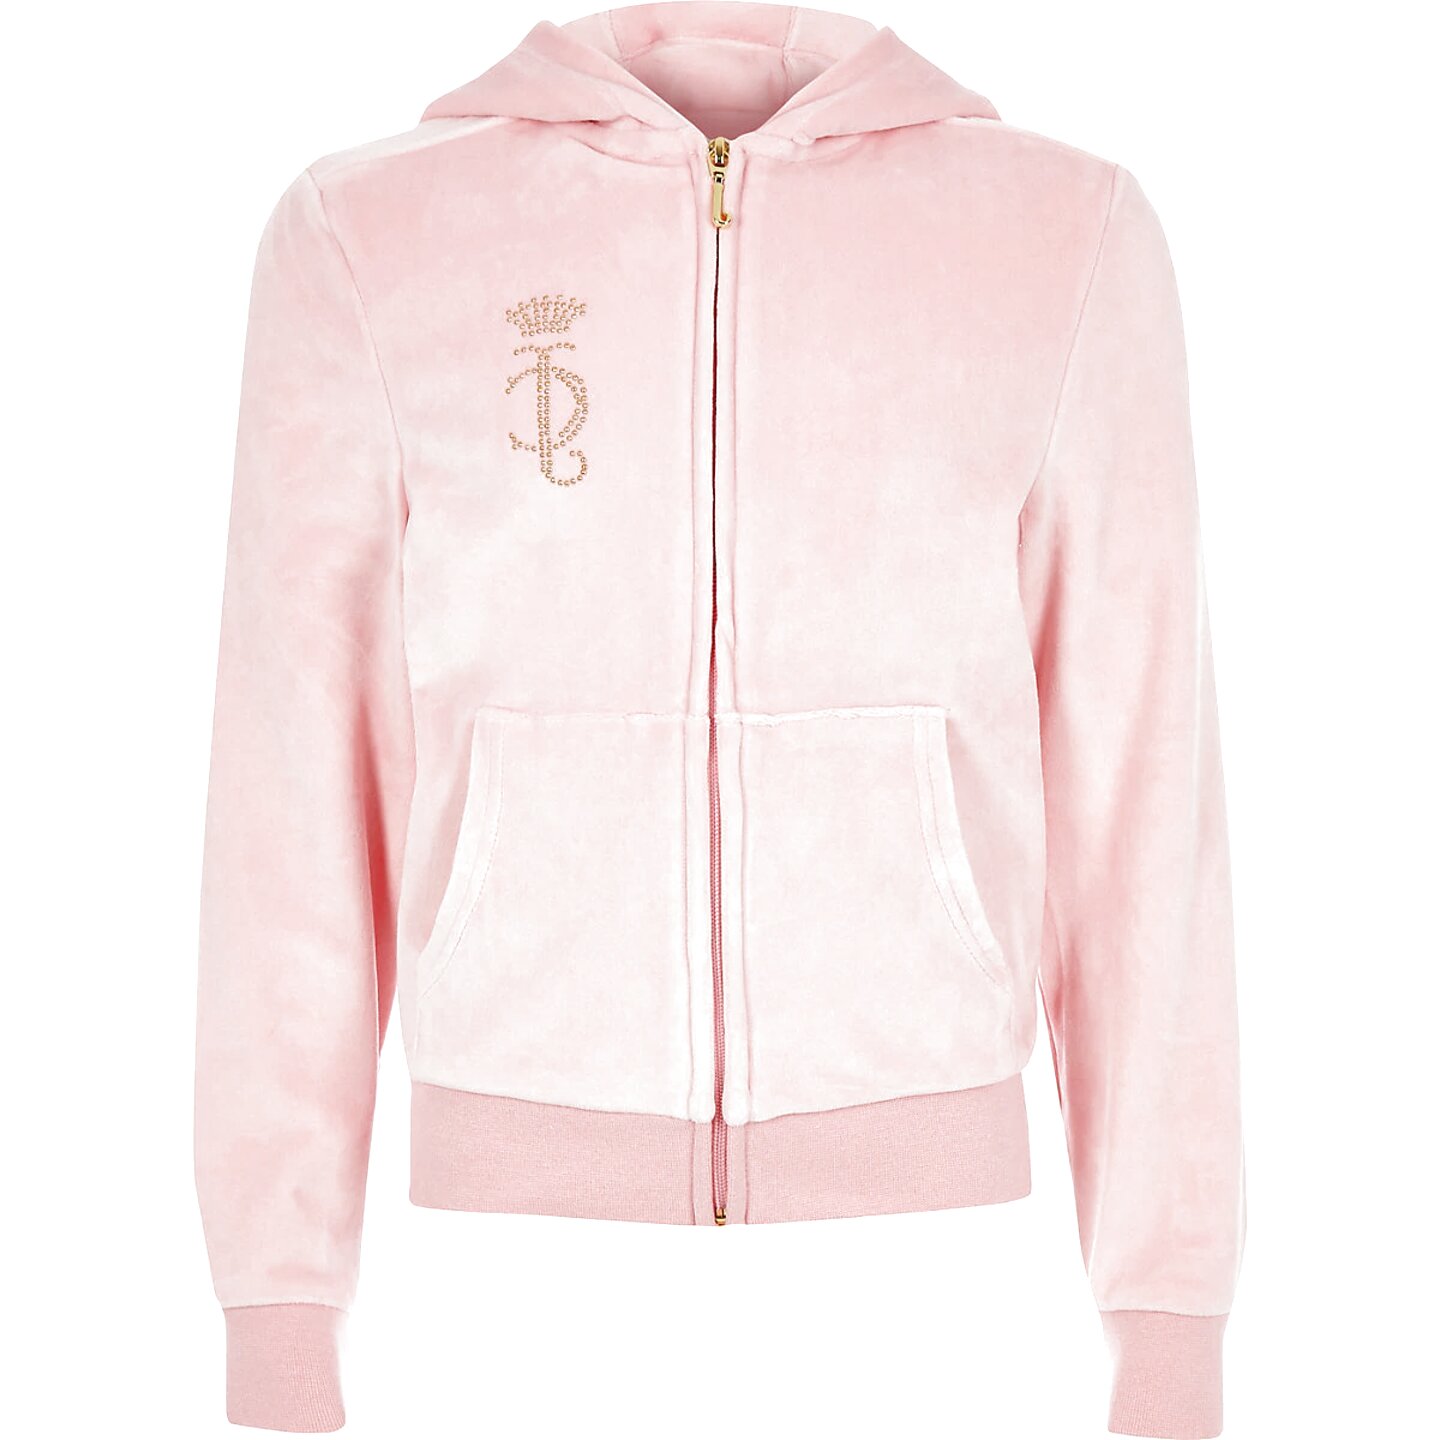 Girls Juicy Couture Tracksuit for sale in UK | 57 used Girls Juicy